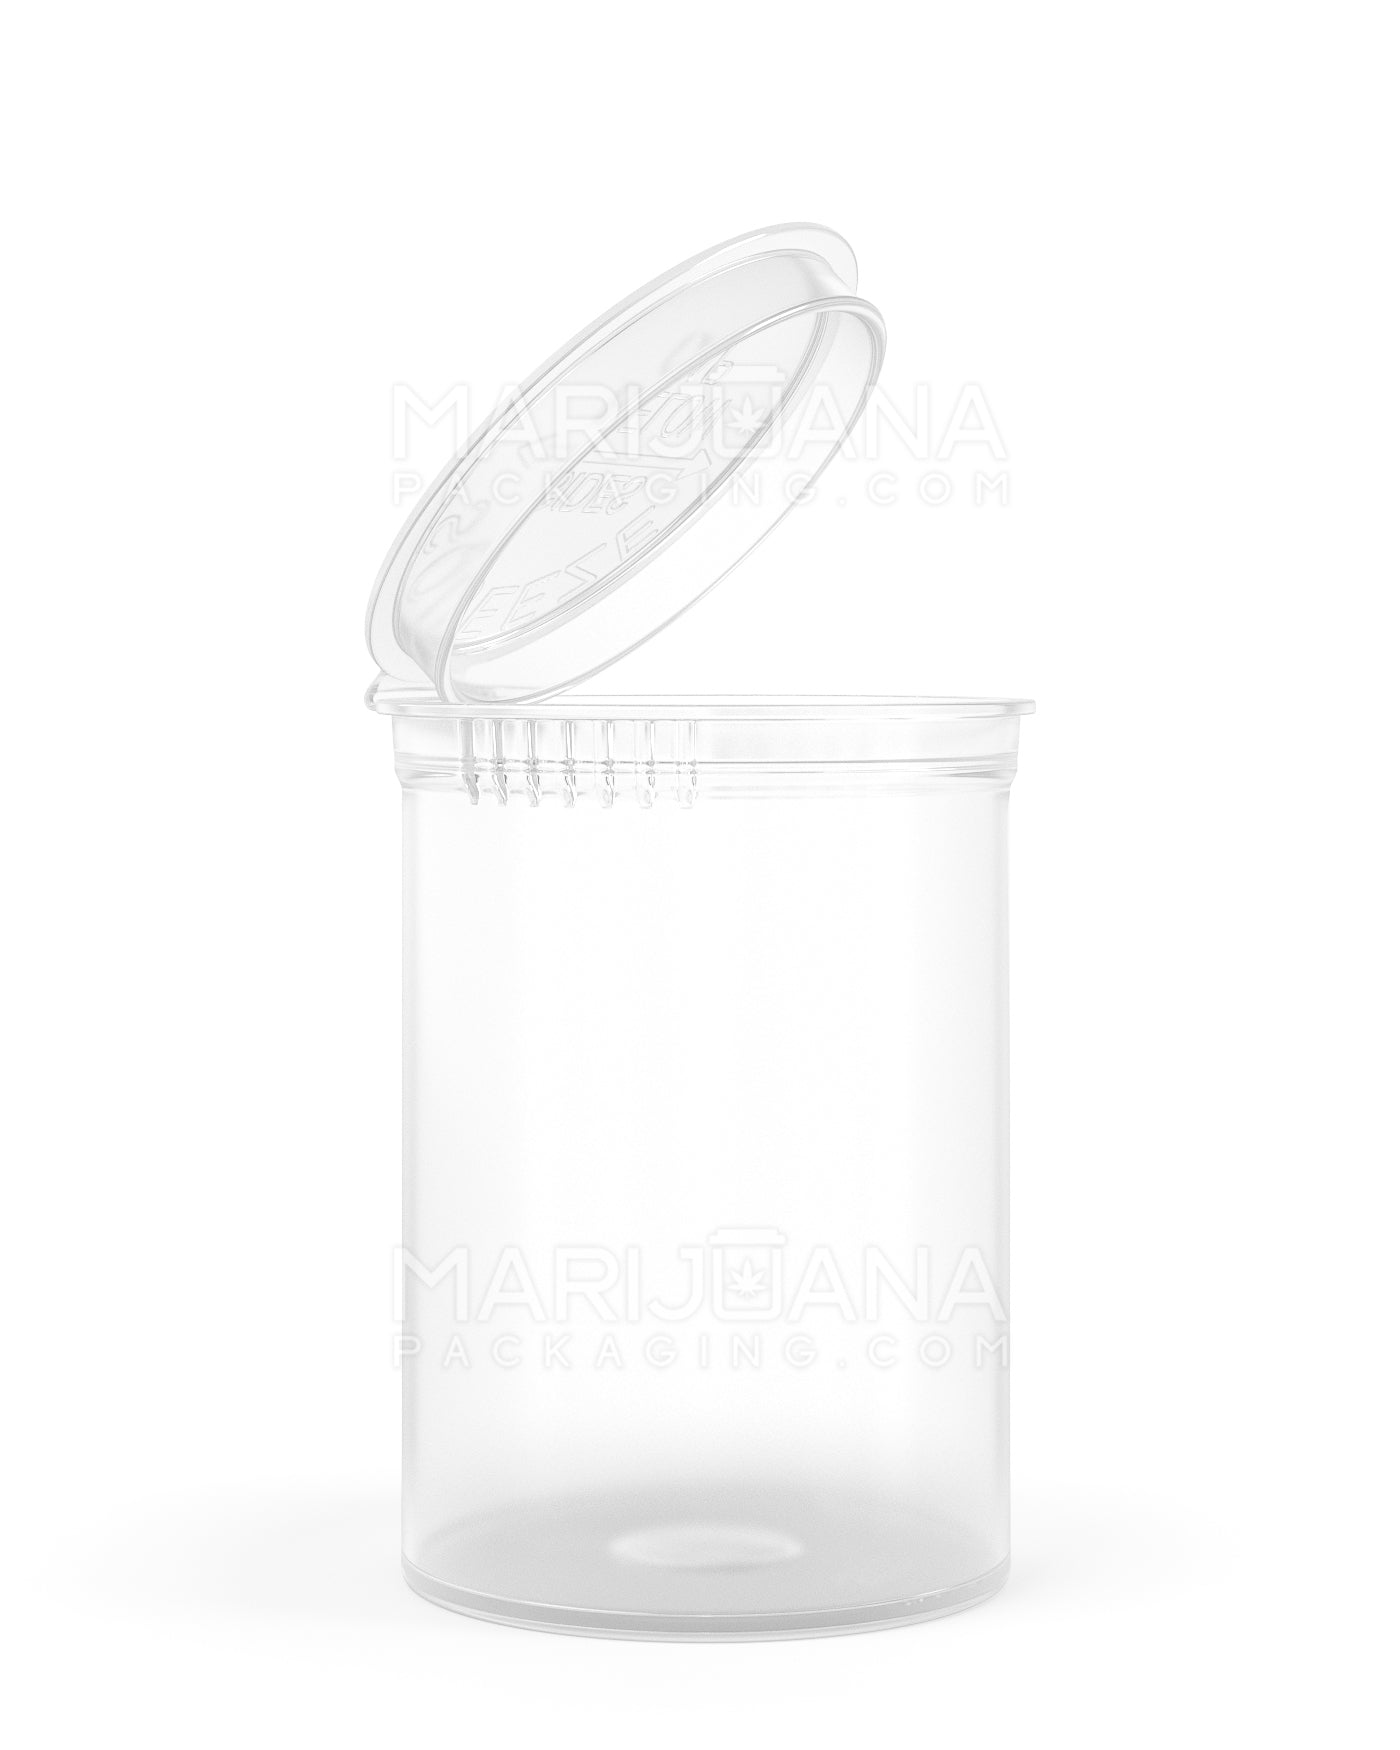 Child Resistant & Sustainable | 100% Biodegradable Clear Pop Top Bottles | 30dr - 7g - 150 Count - 1